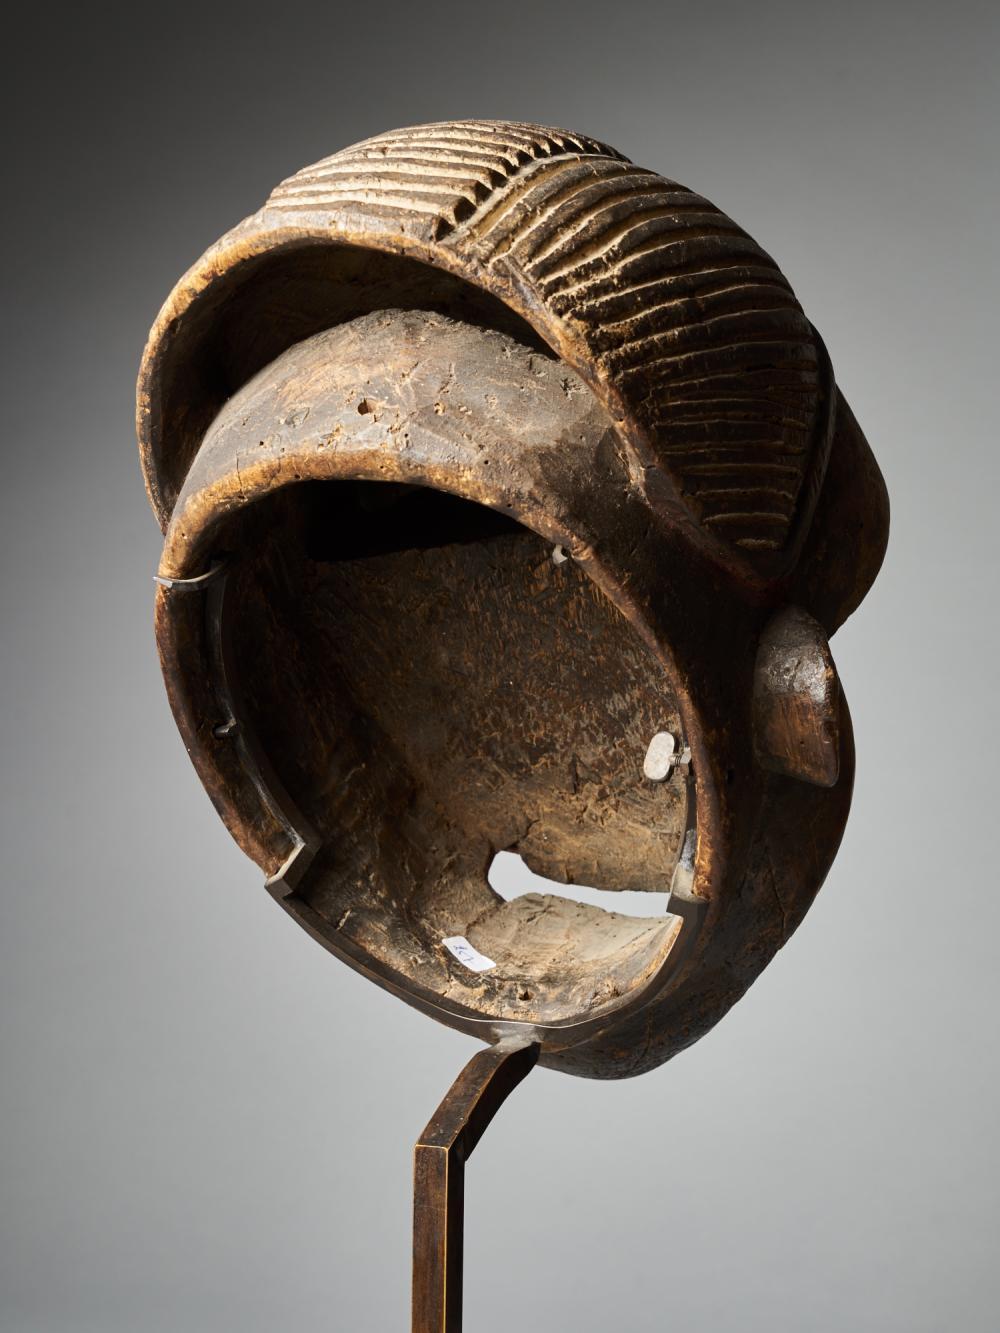 Cameroonian Wum People, Cameroon, Runner Mask 